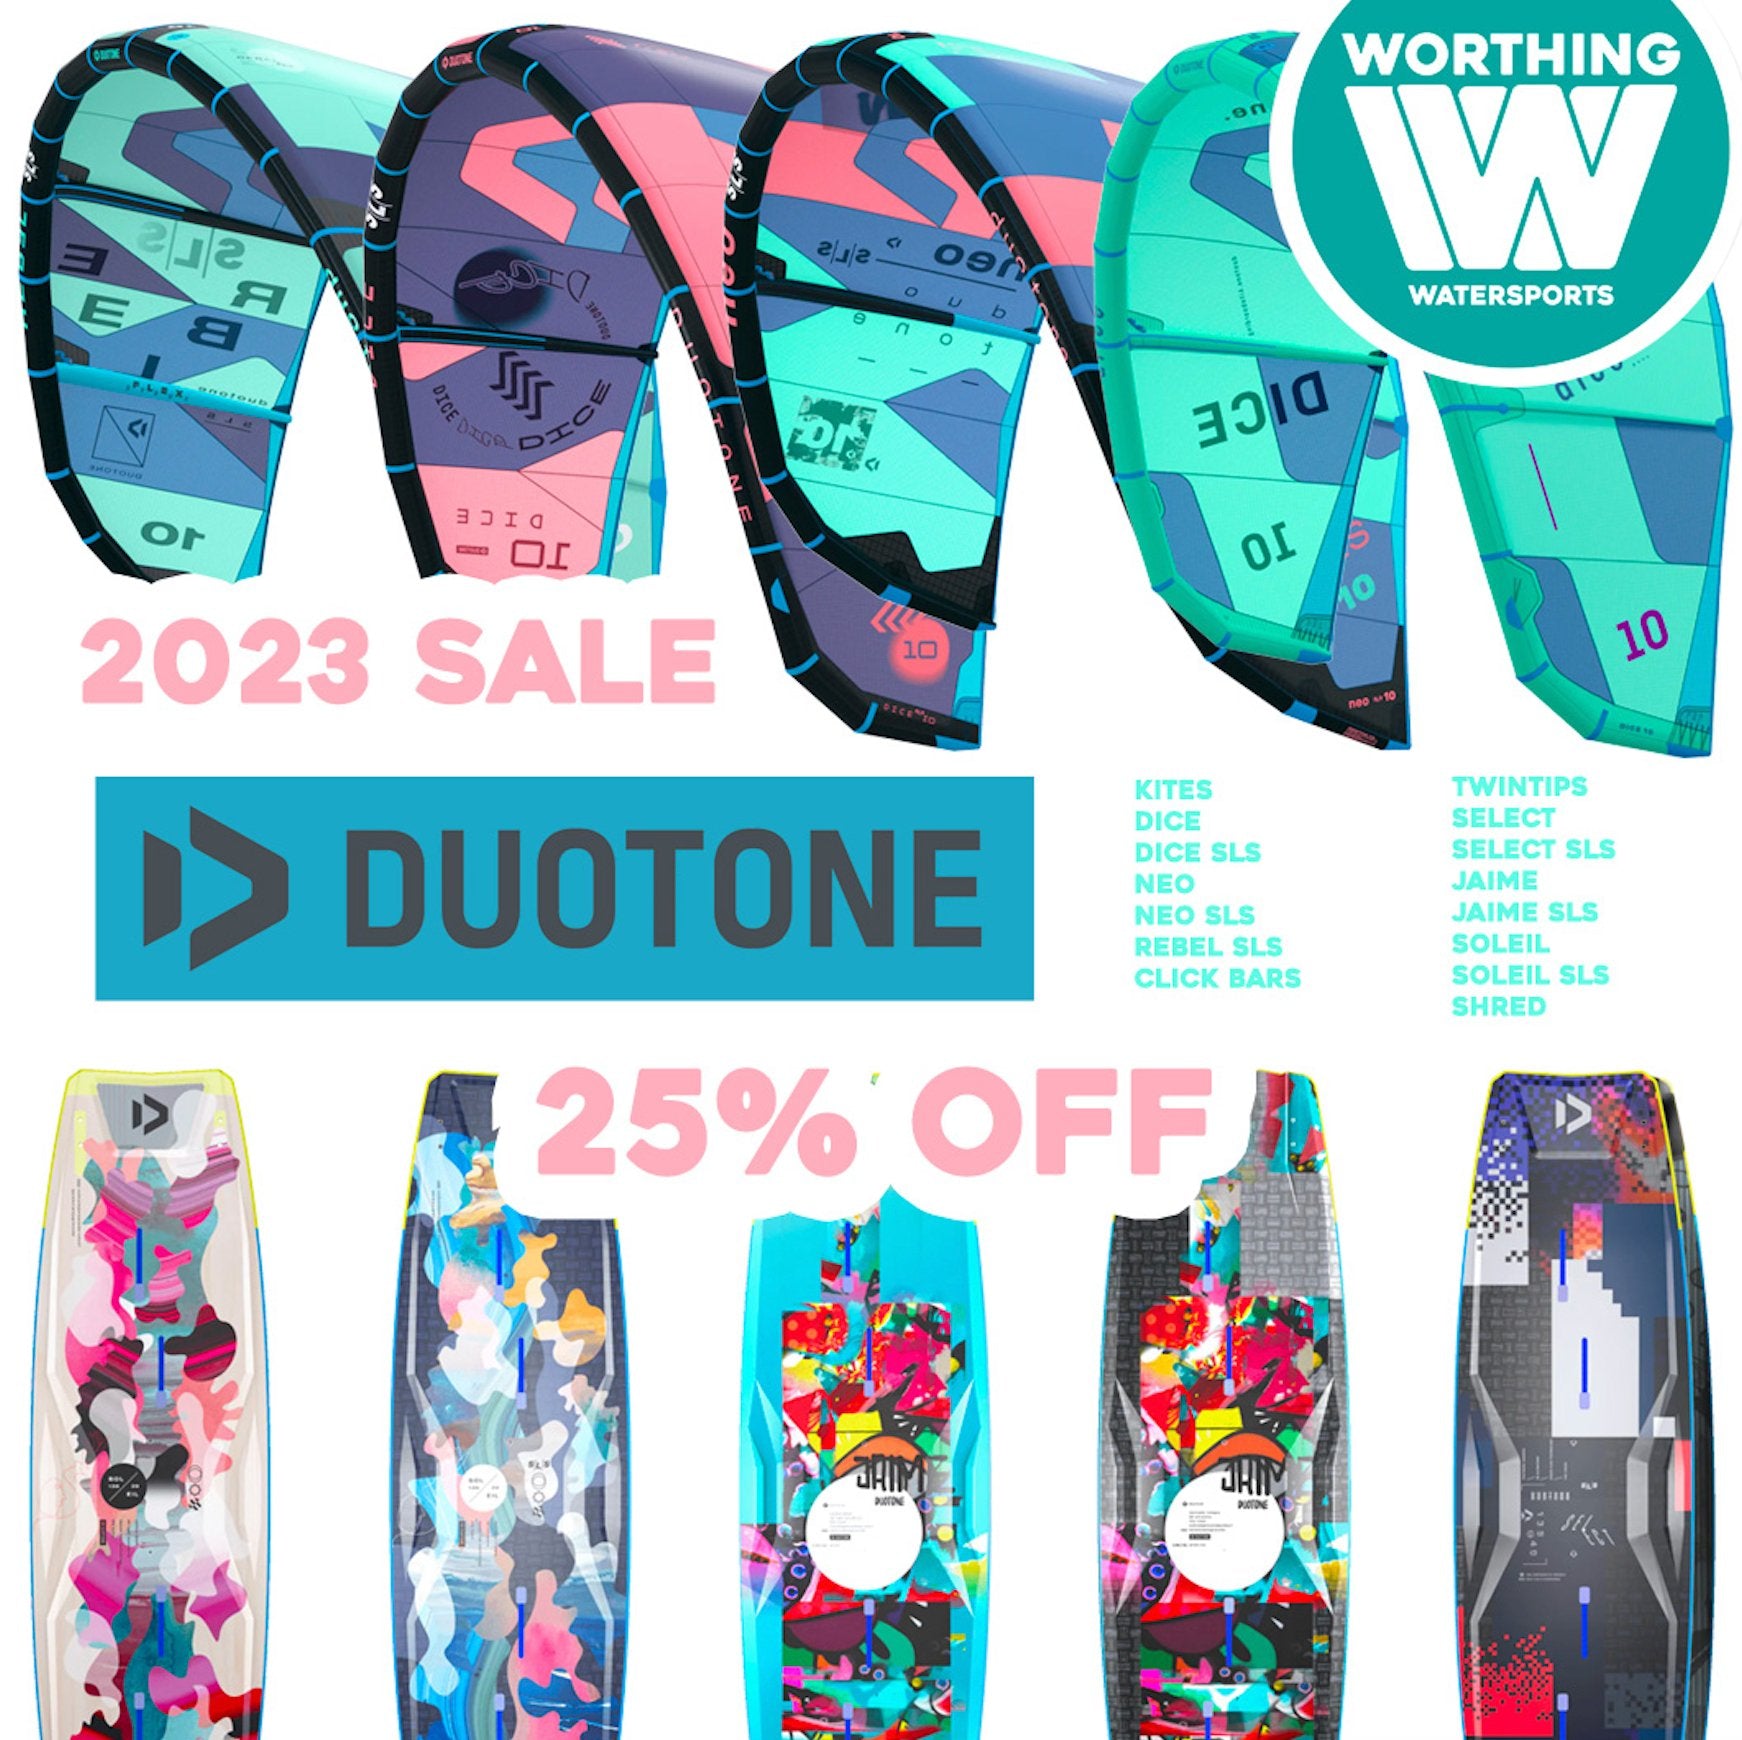 Duotone Kiteboarding 2023 Close Out - Worthing Watersports